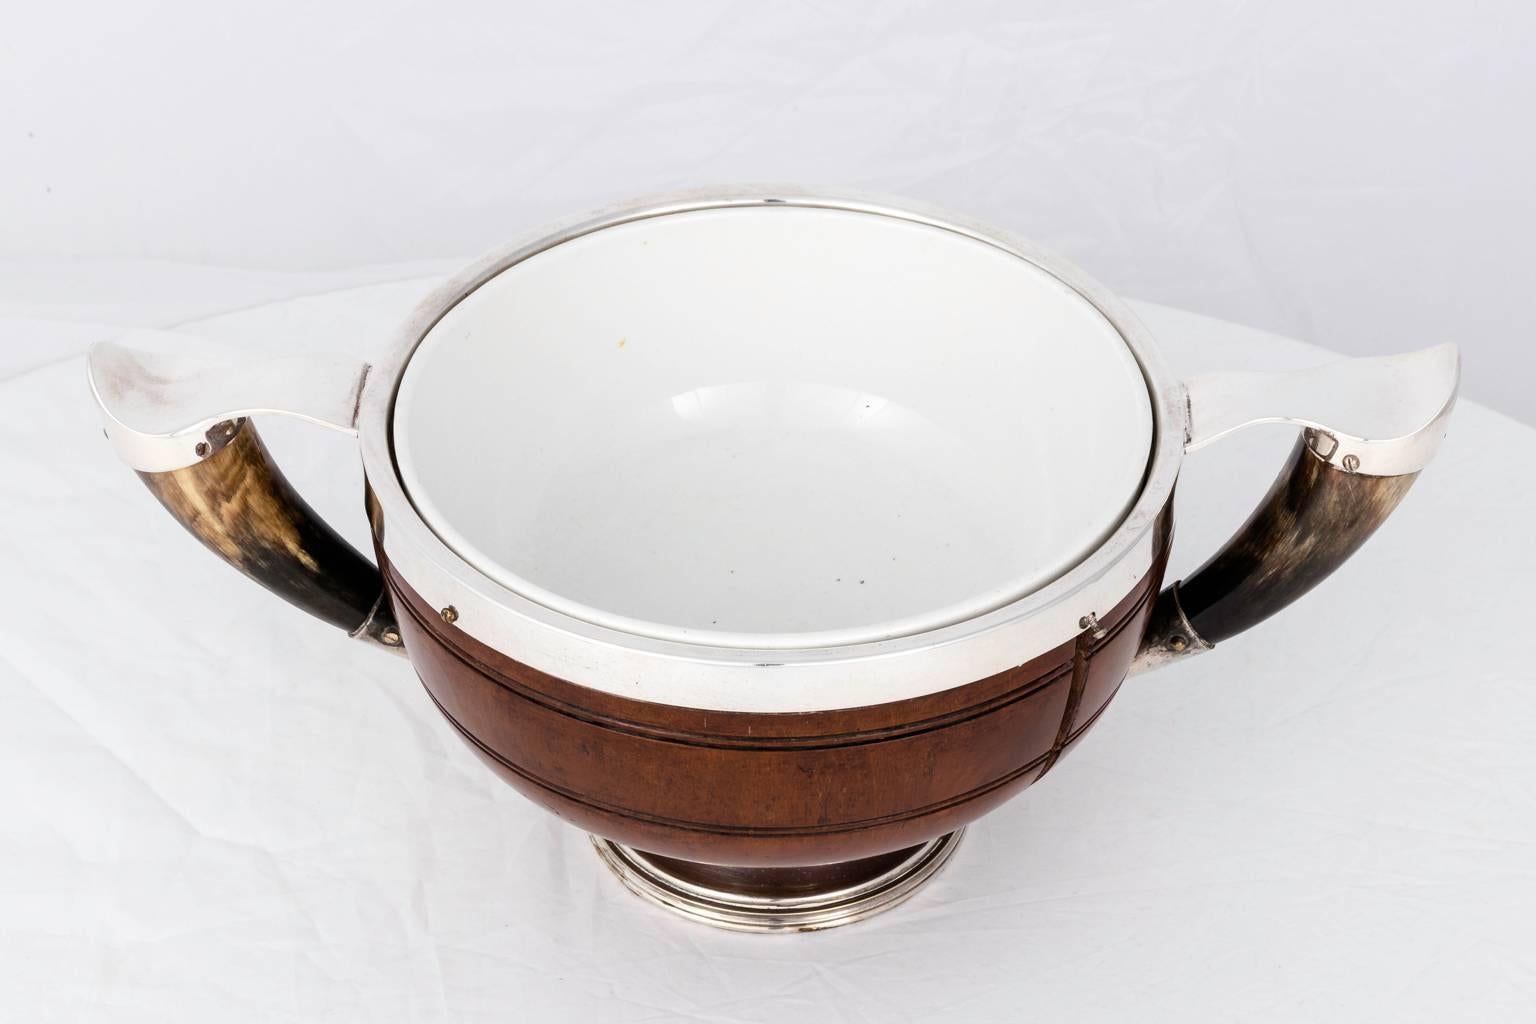 Circa early 20th century Edwardian wood and silver plated server bowl.
